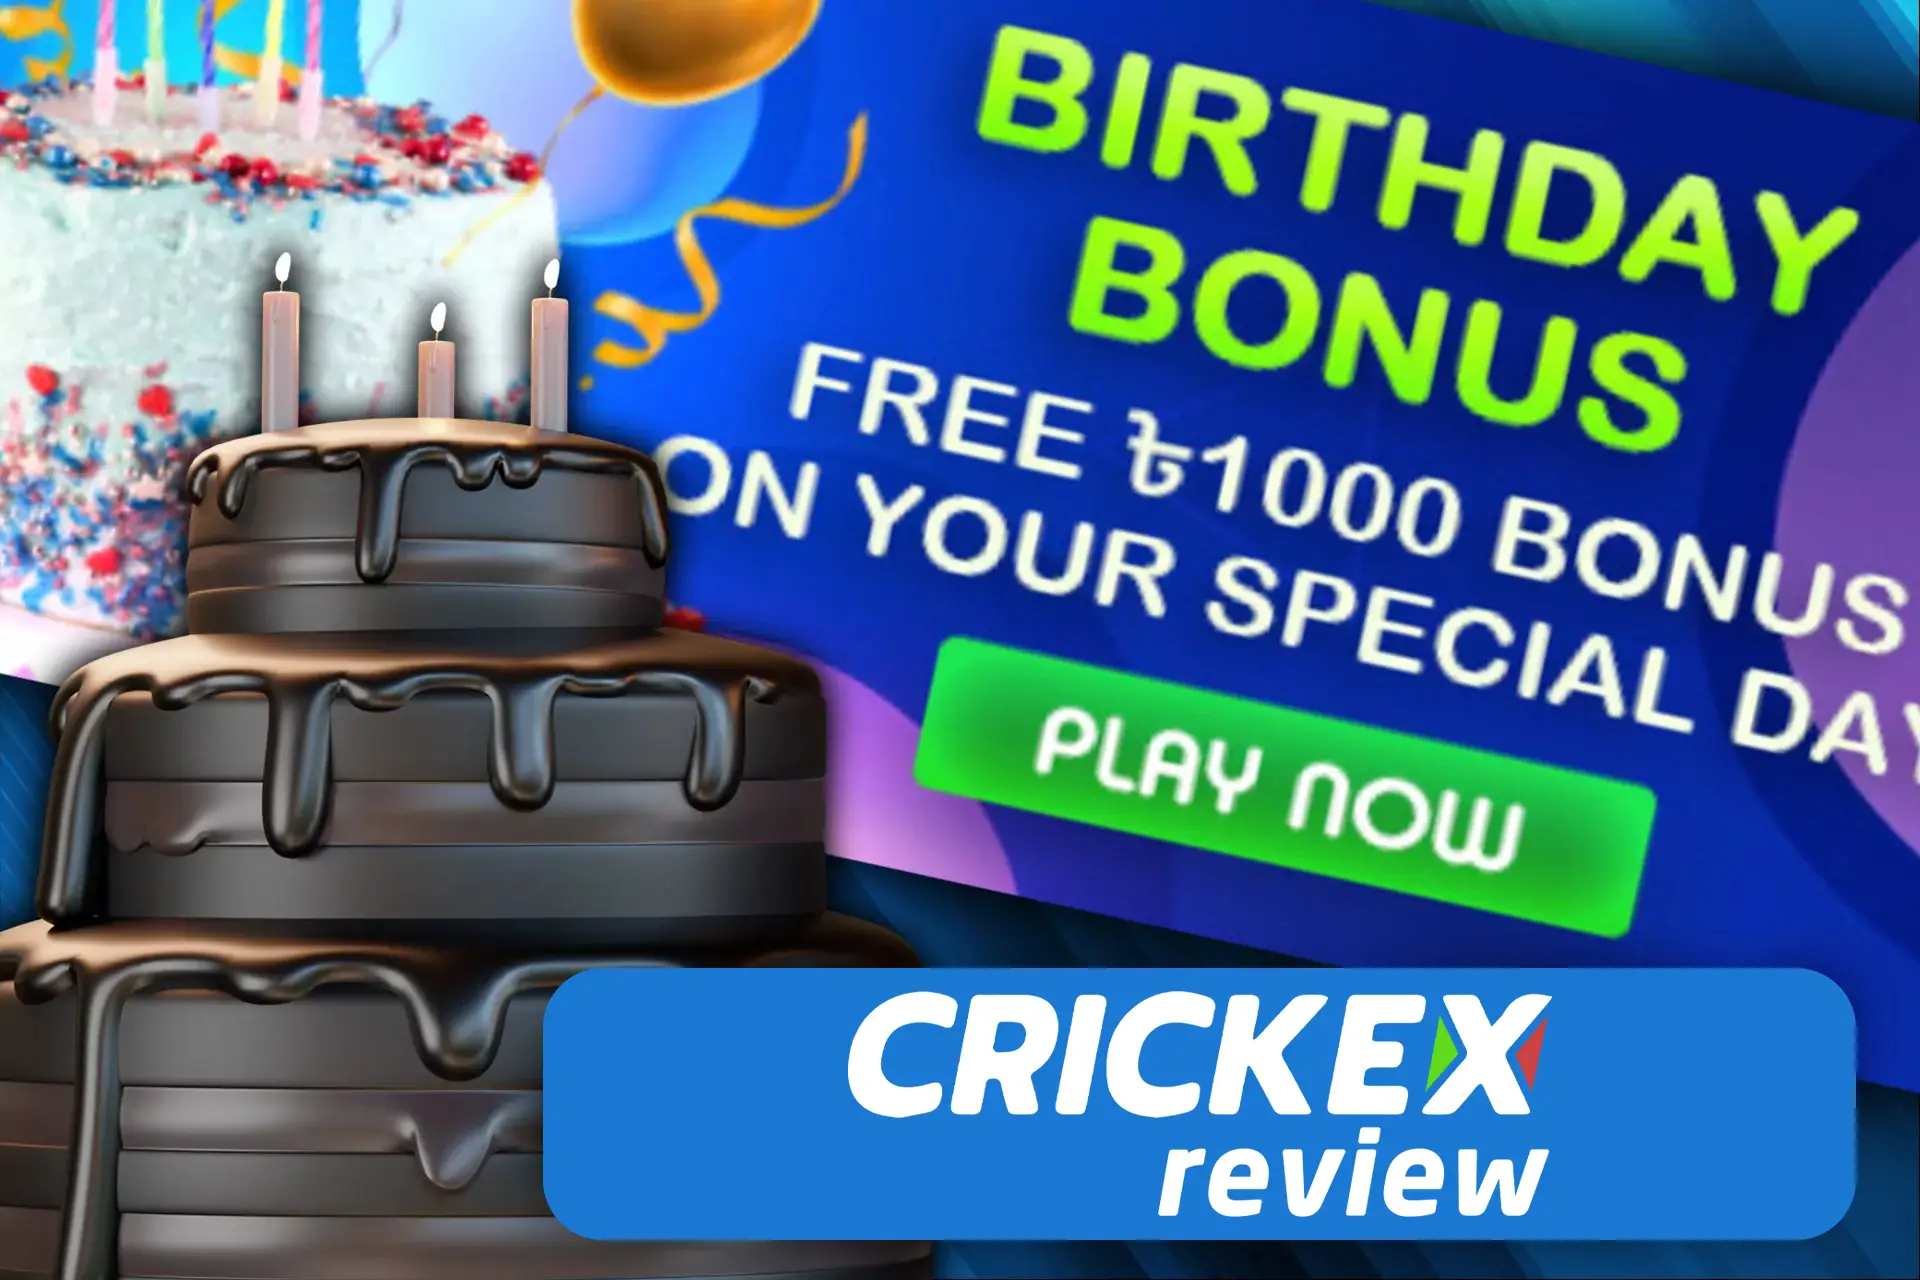 Crickex gives every player 1000 BDT on his birthday.